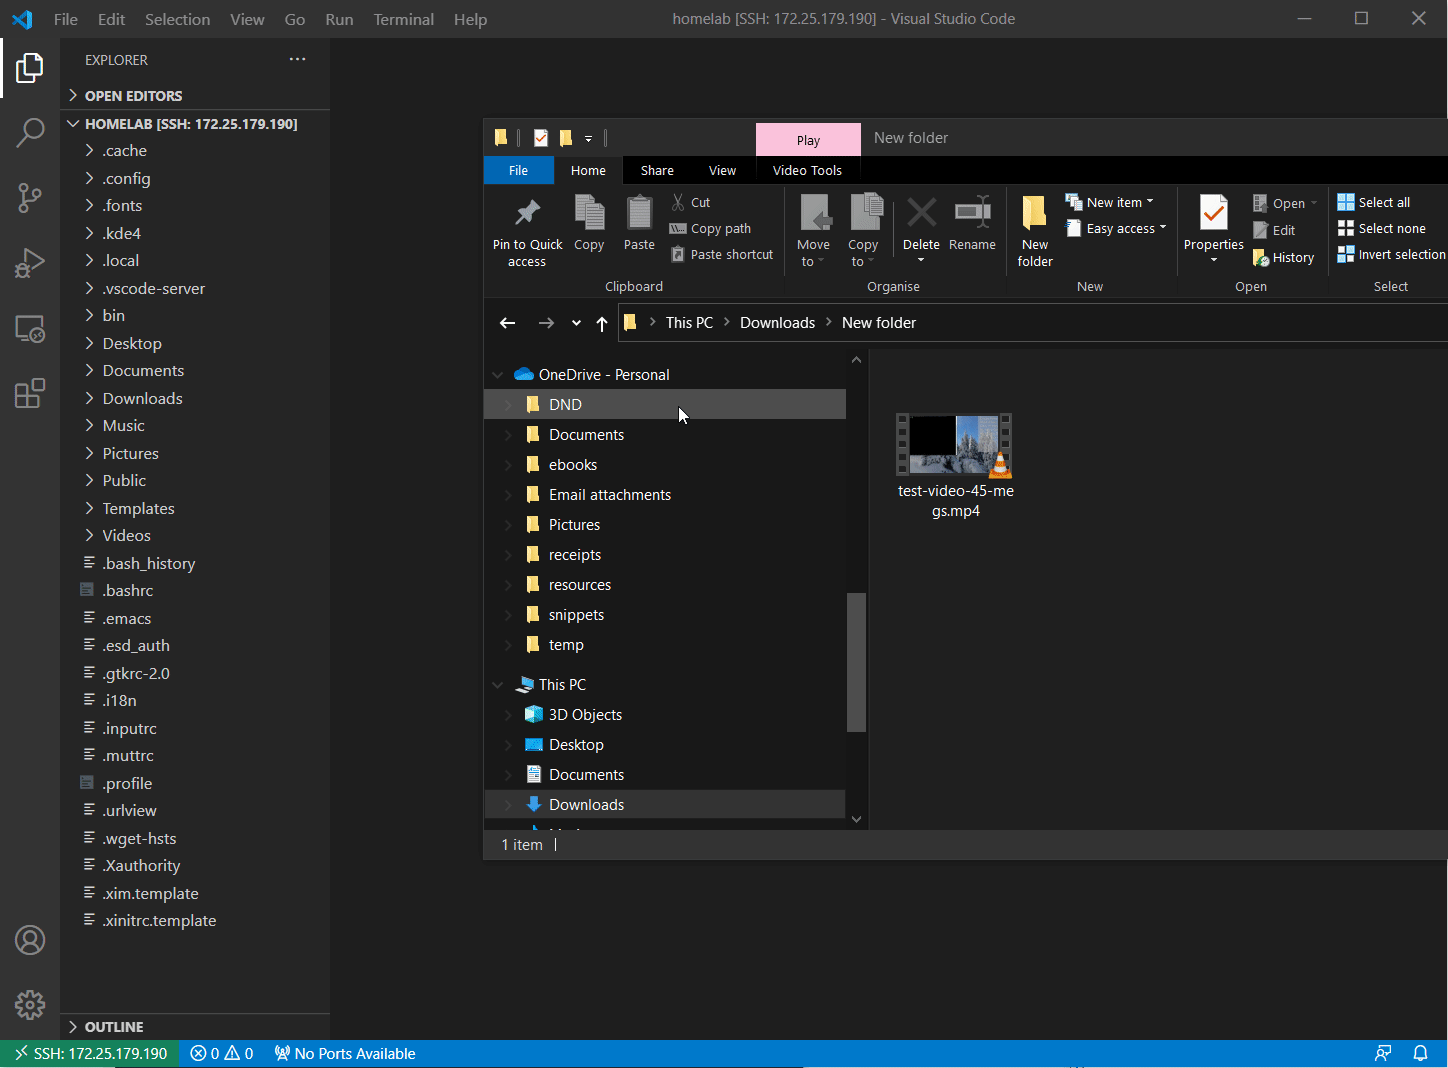 Utilizing the upload feature of VSCode